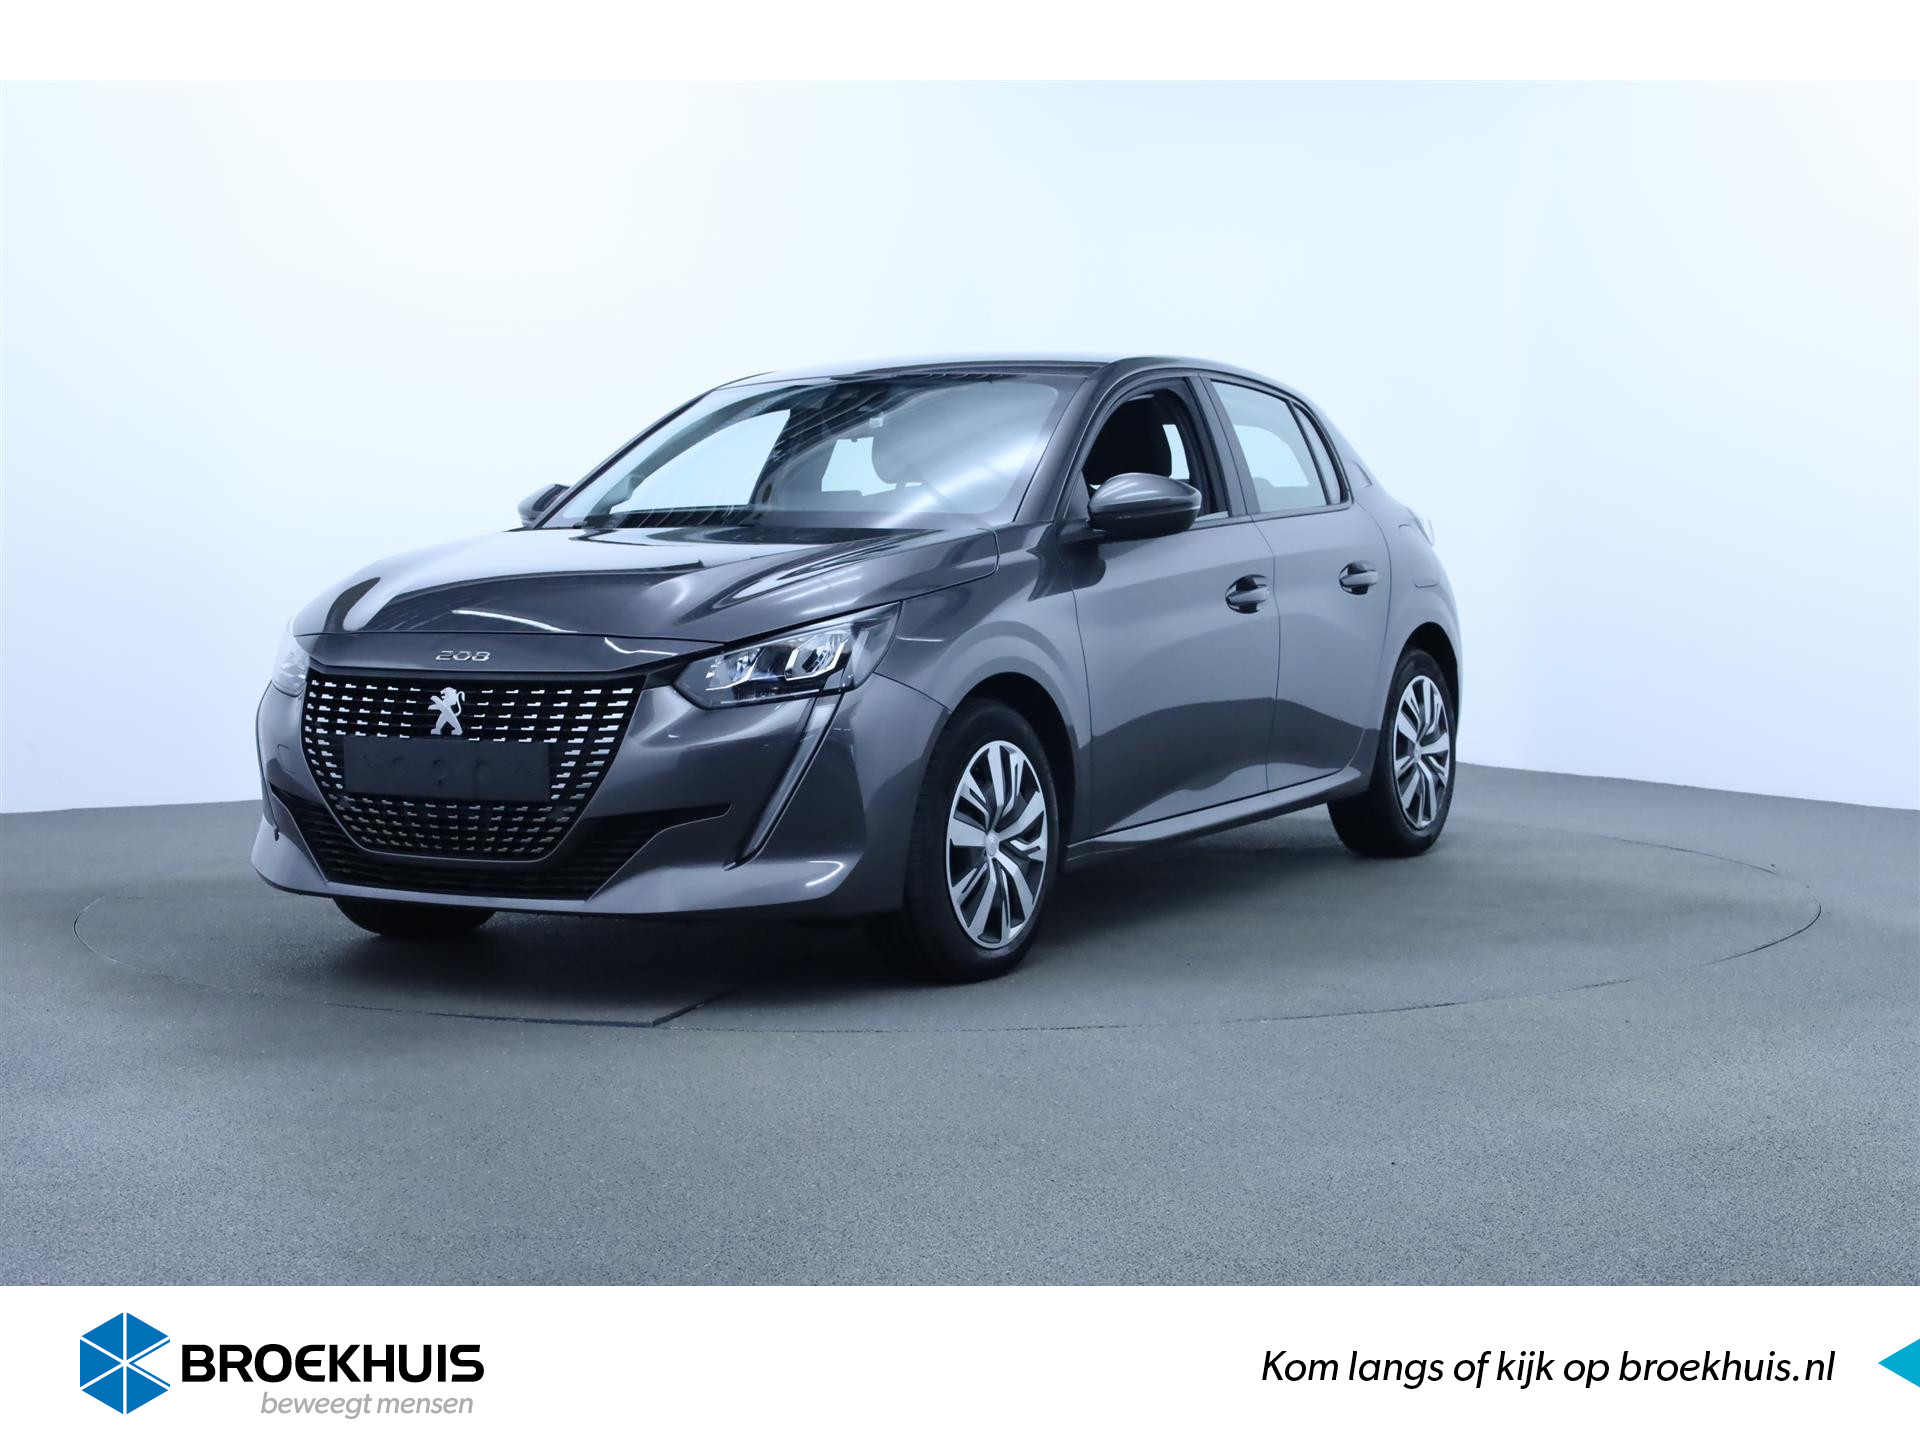 Peugeot 208 1.2 100PK Active | Stoelverwaming | LED | Apple/Android Carplay | DAB | Bluetooth | Centrale Vergrendeling | USB | Touchscreen bij viaBOVAG.nl